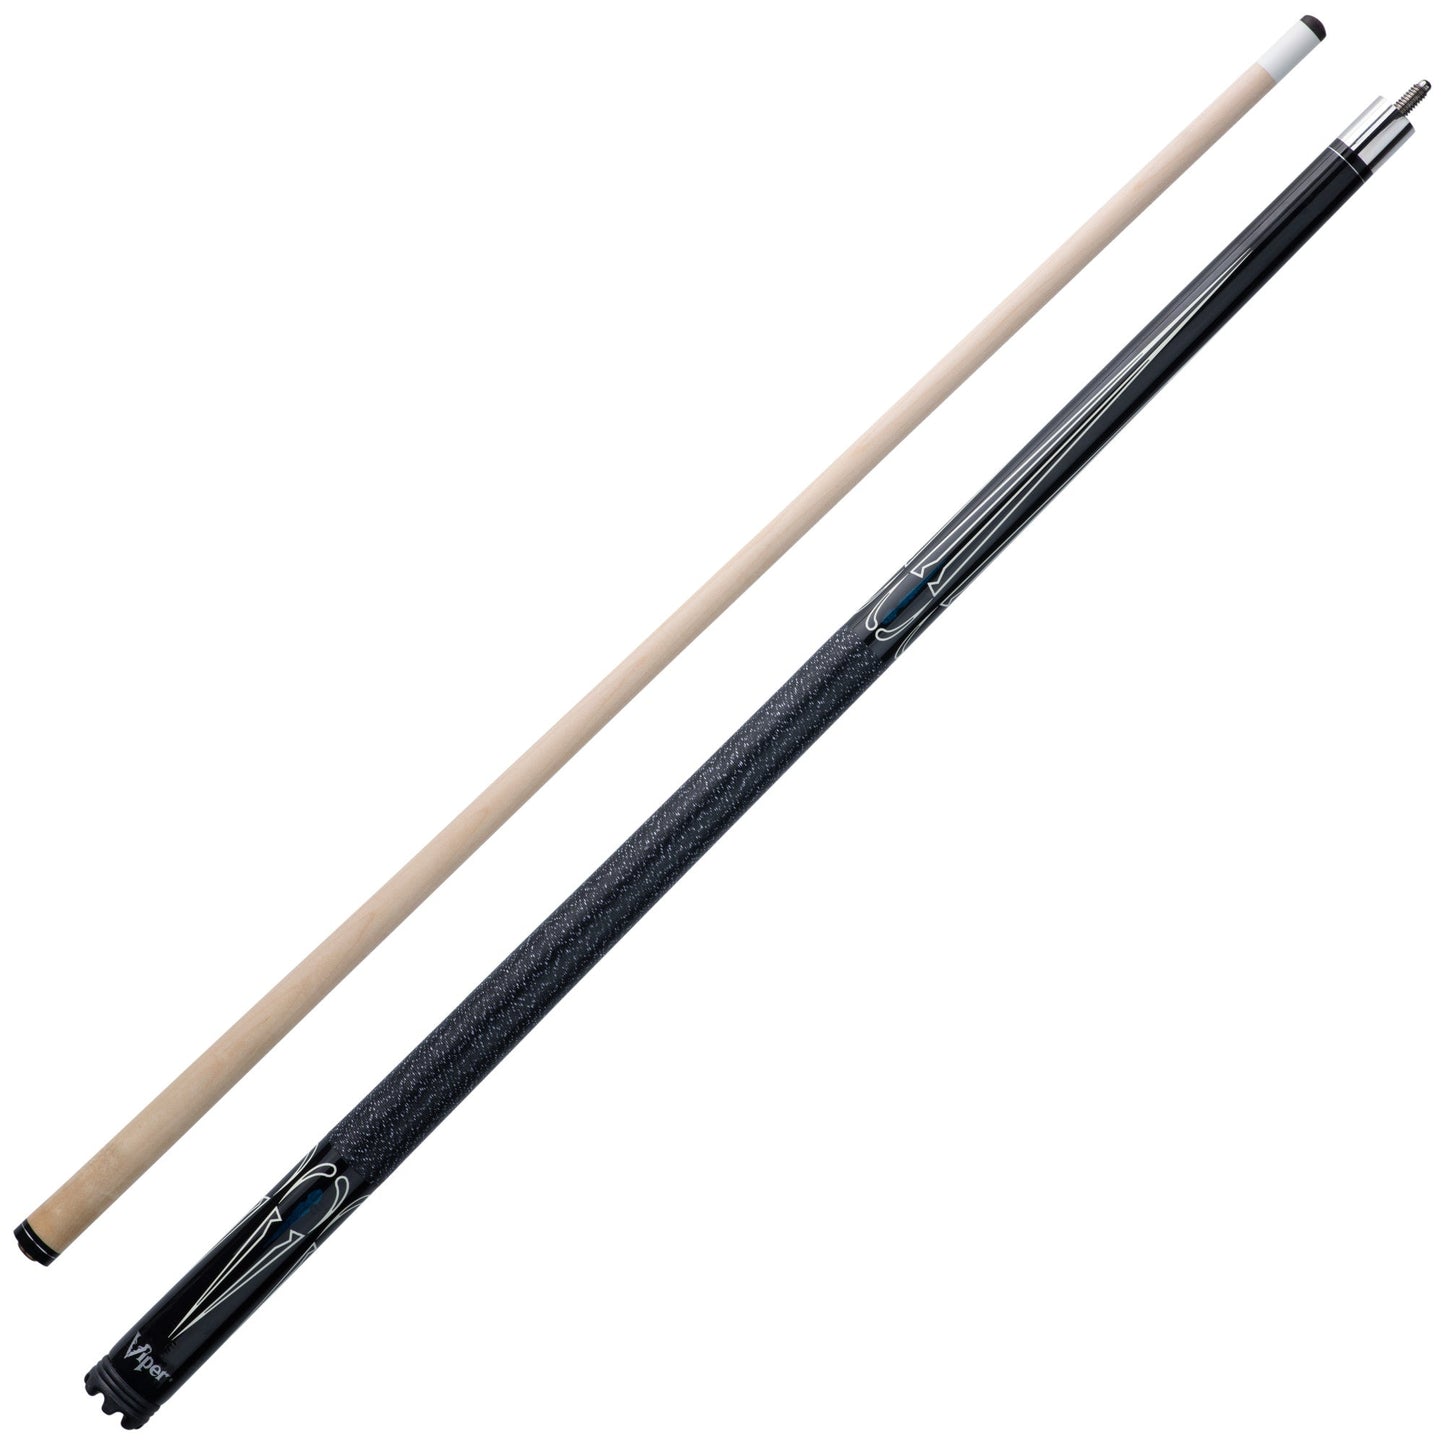 Viper Sinister Black and White 21 Ounce Pool Cue